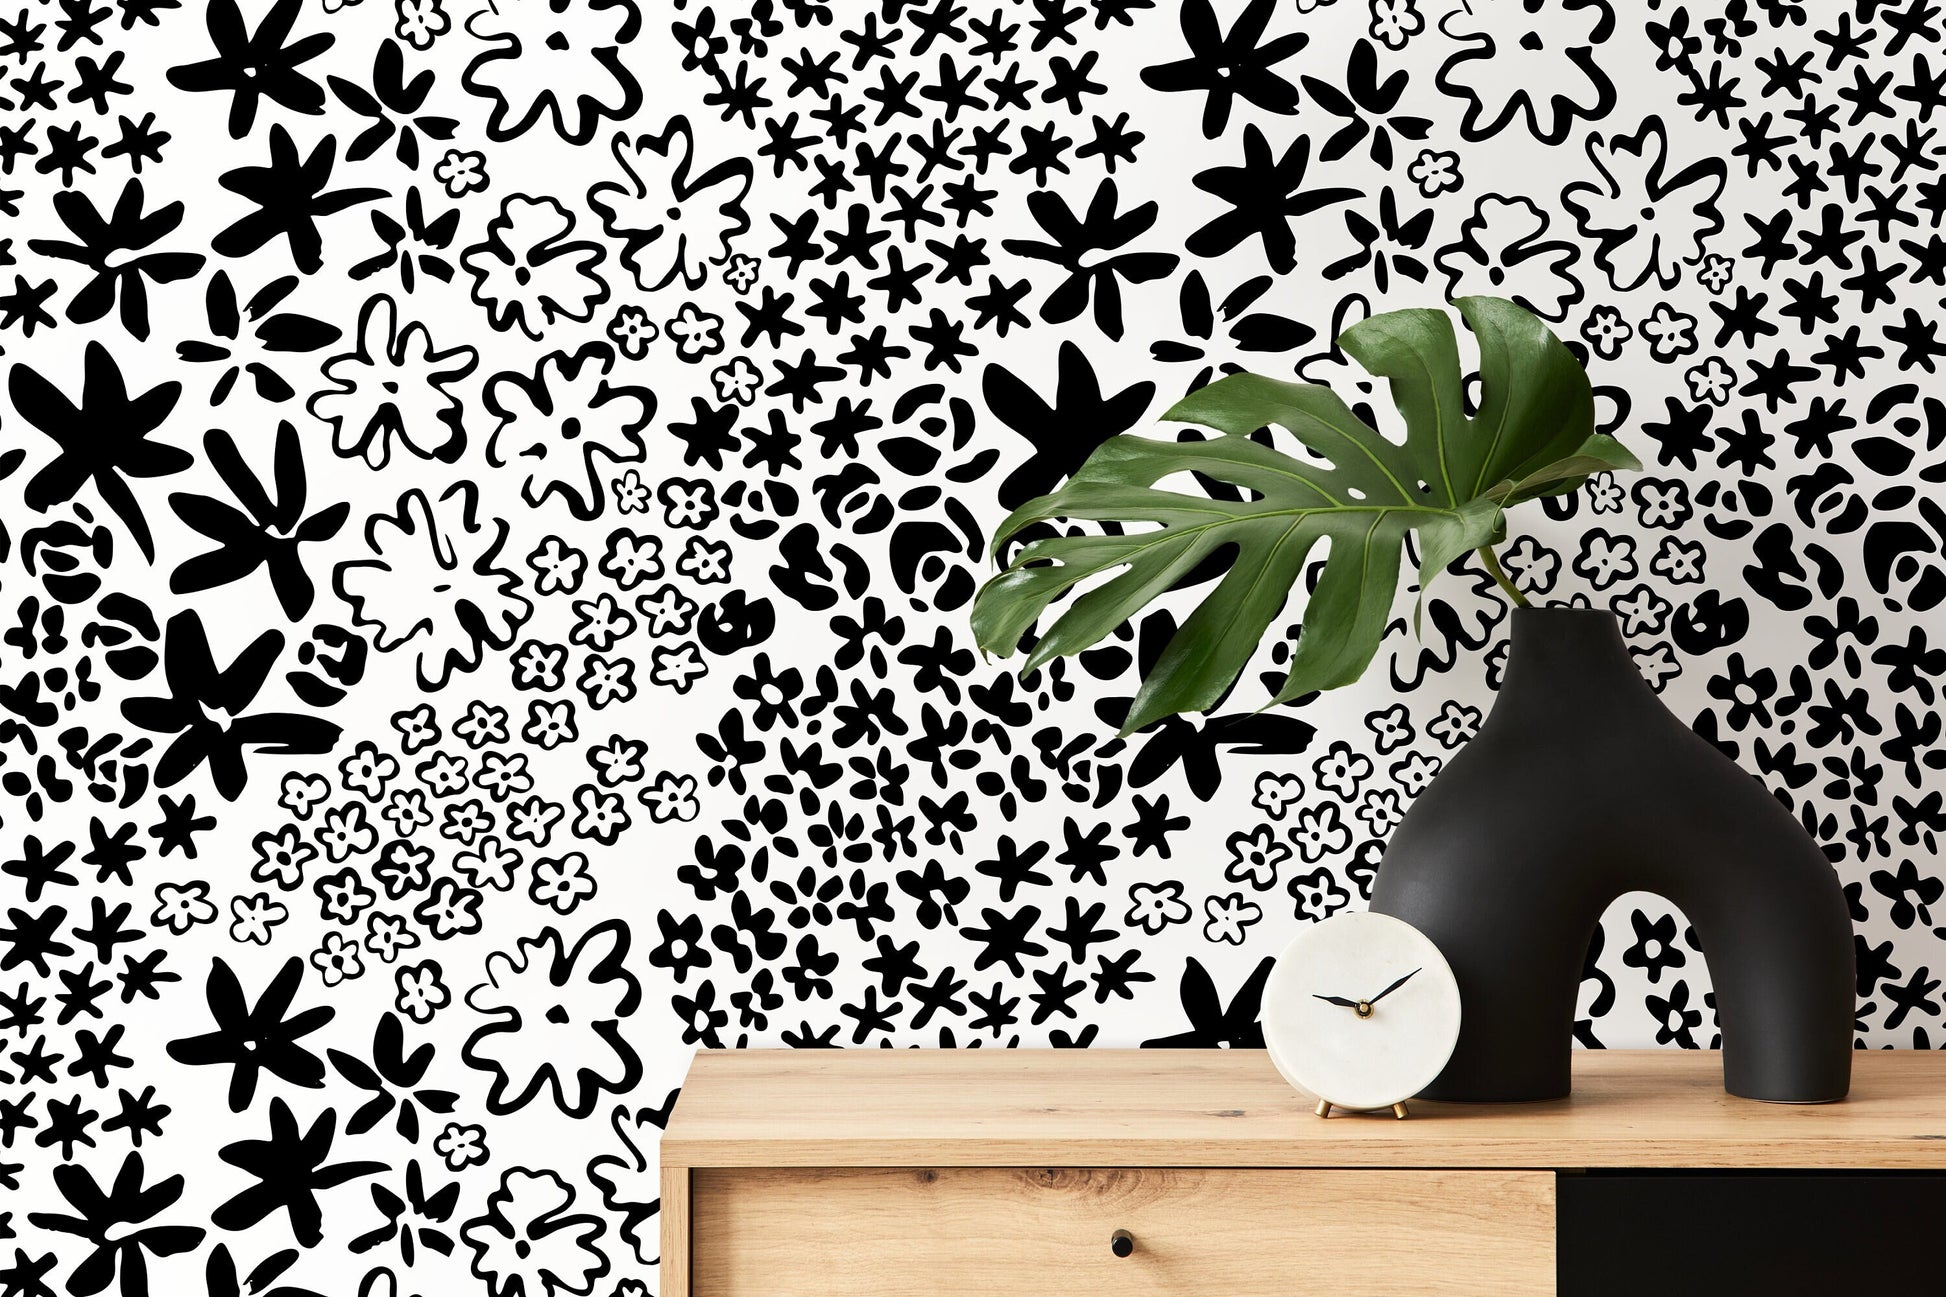 Black and White Floral Wallpaper / Peel and Stick Wallpaper Removable Wallpaper Home Decor Wall Art Wall Decor Room Decor - D165